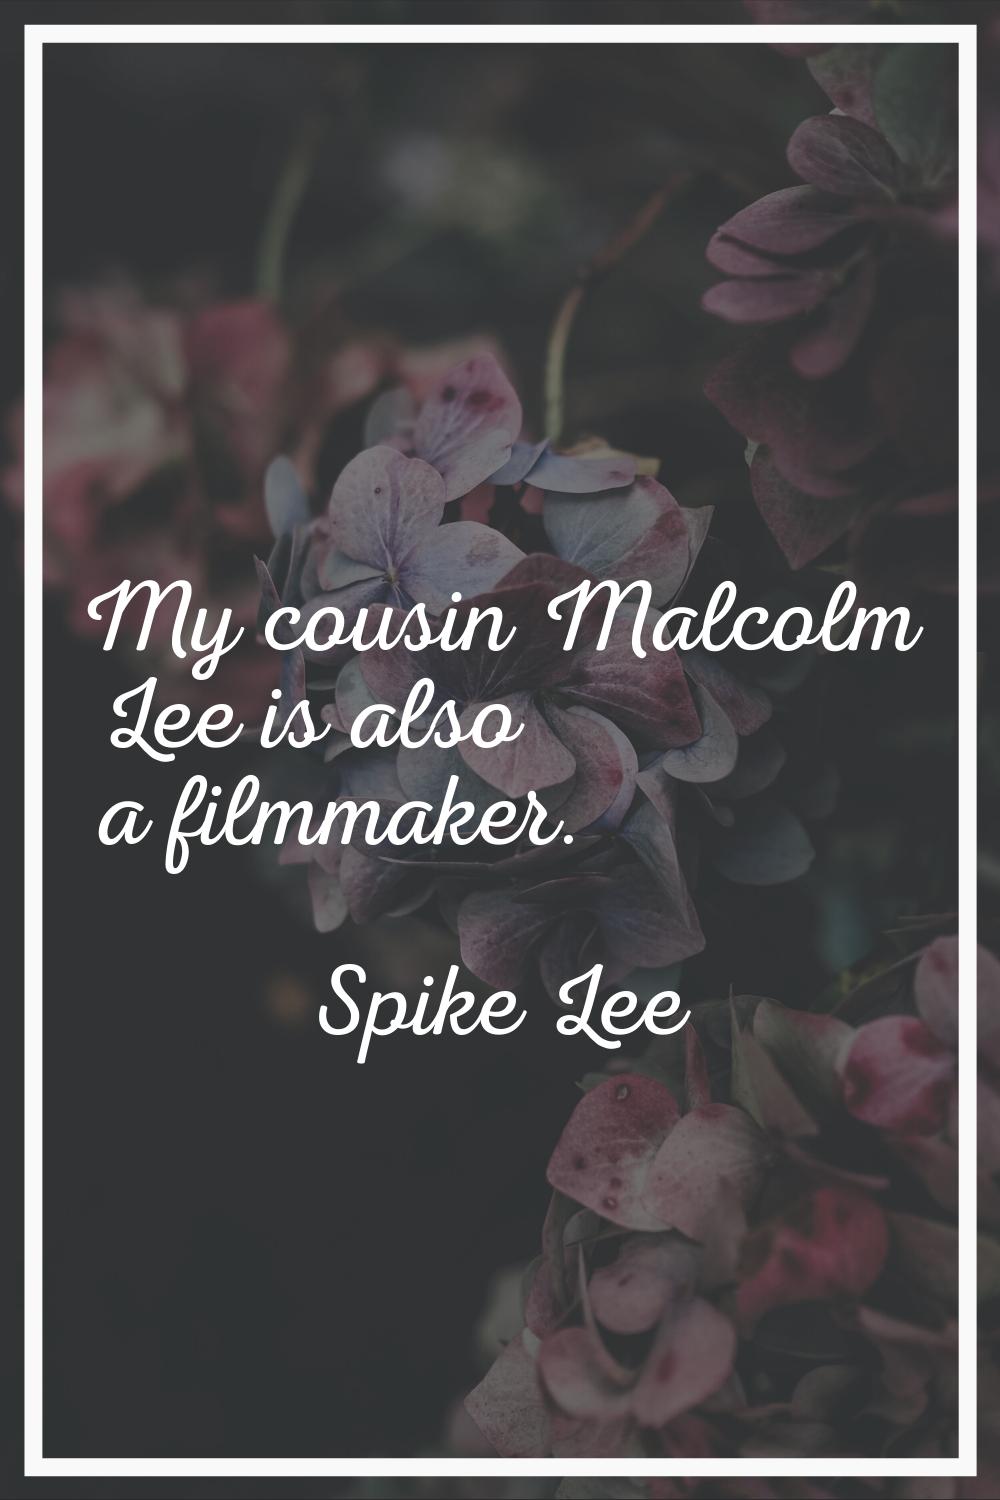 My cousin Malcolm Lee is also a filmmaker.